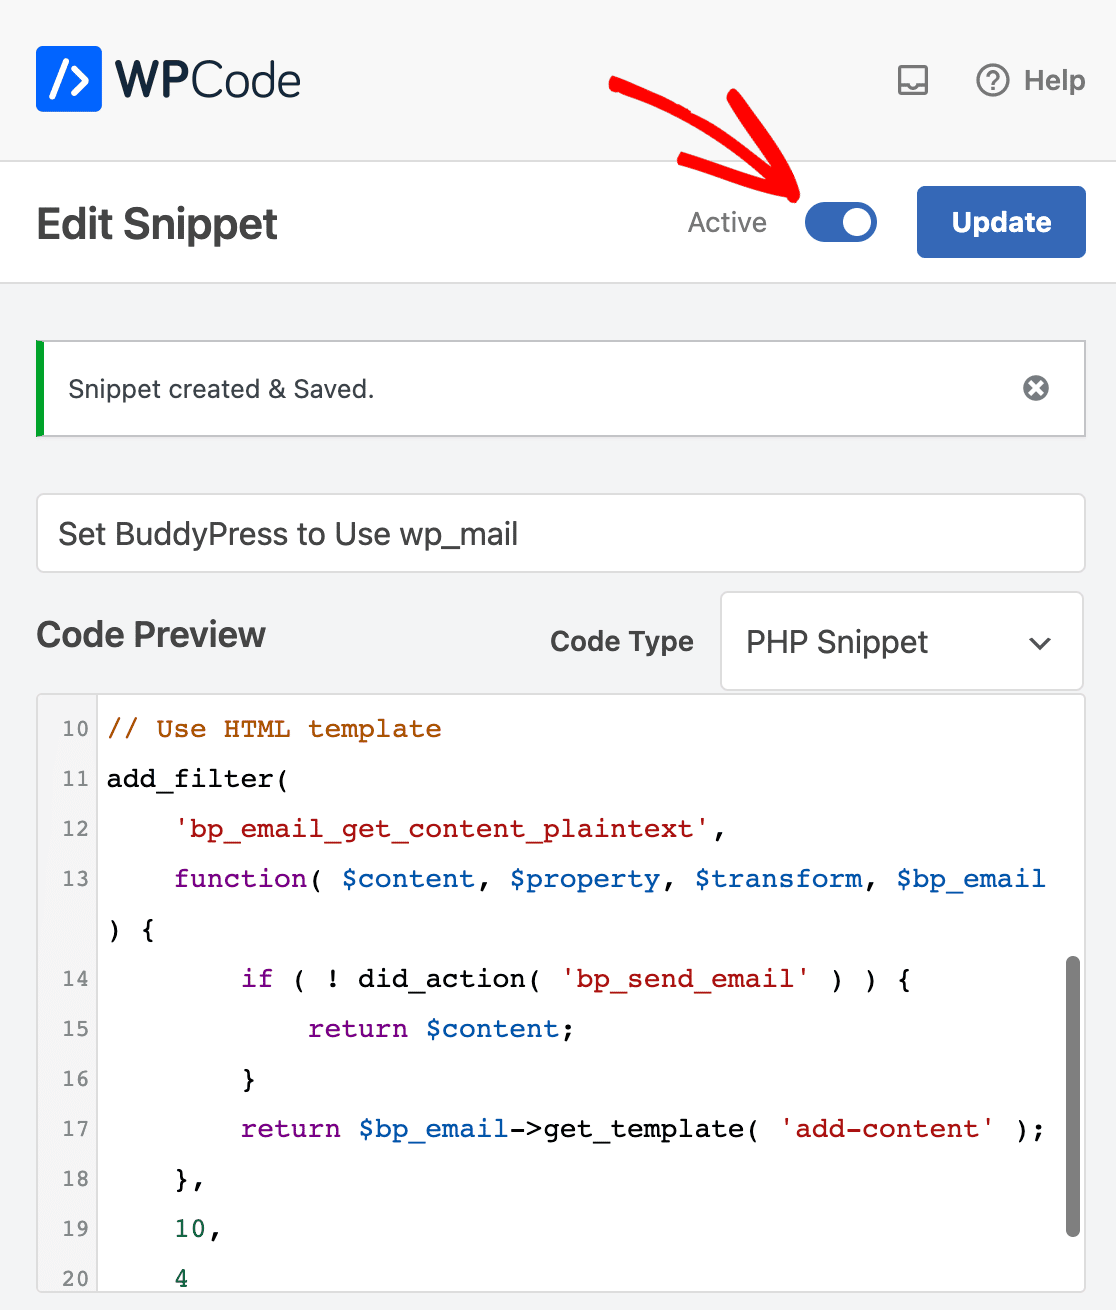 Activating a WPCode snippet